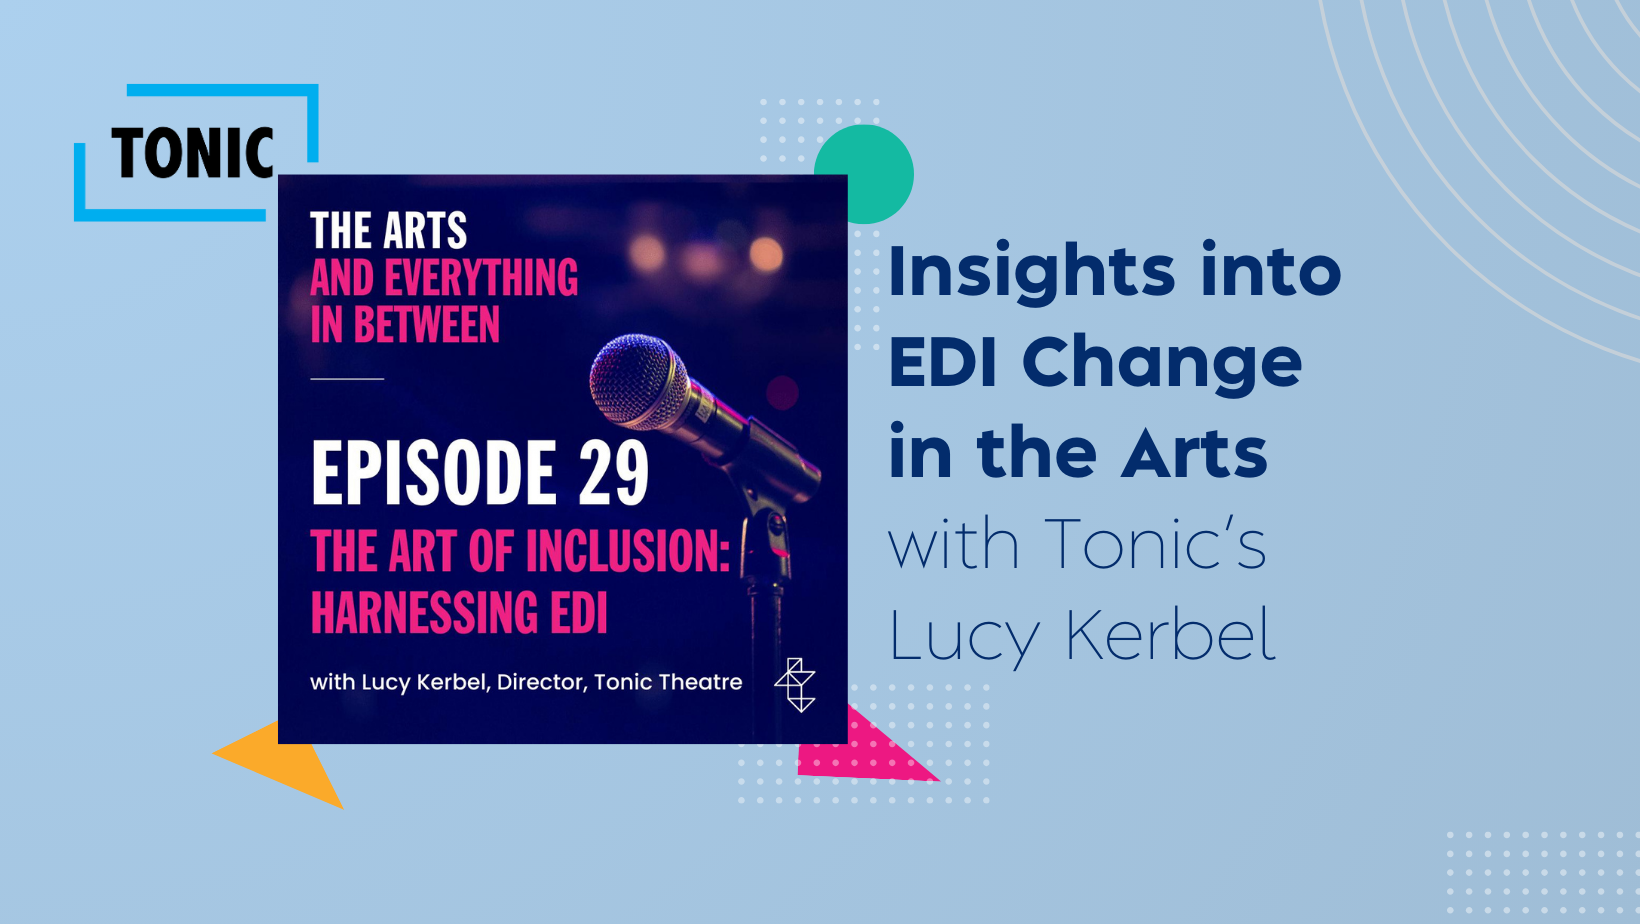 Insights into EDI Change in the Arts with Tonic's Lucy Kerbel